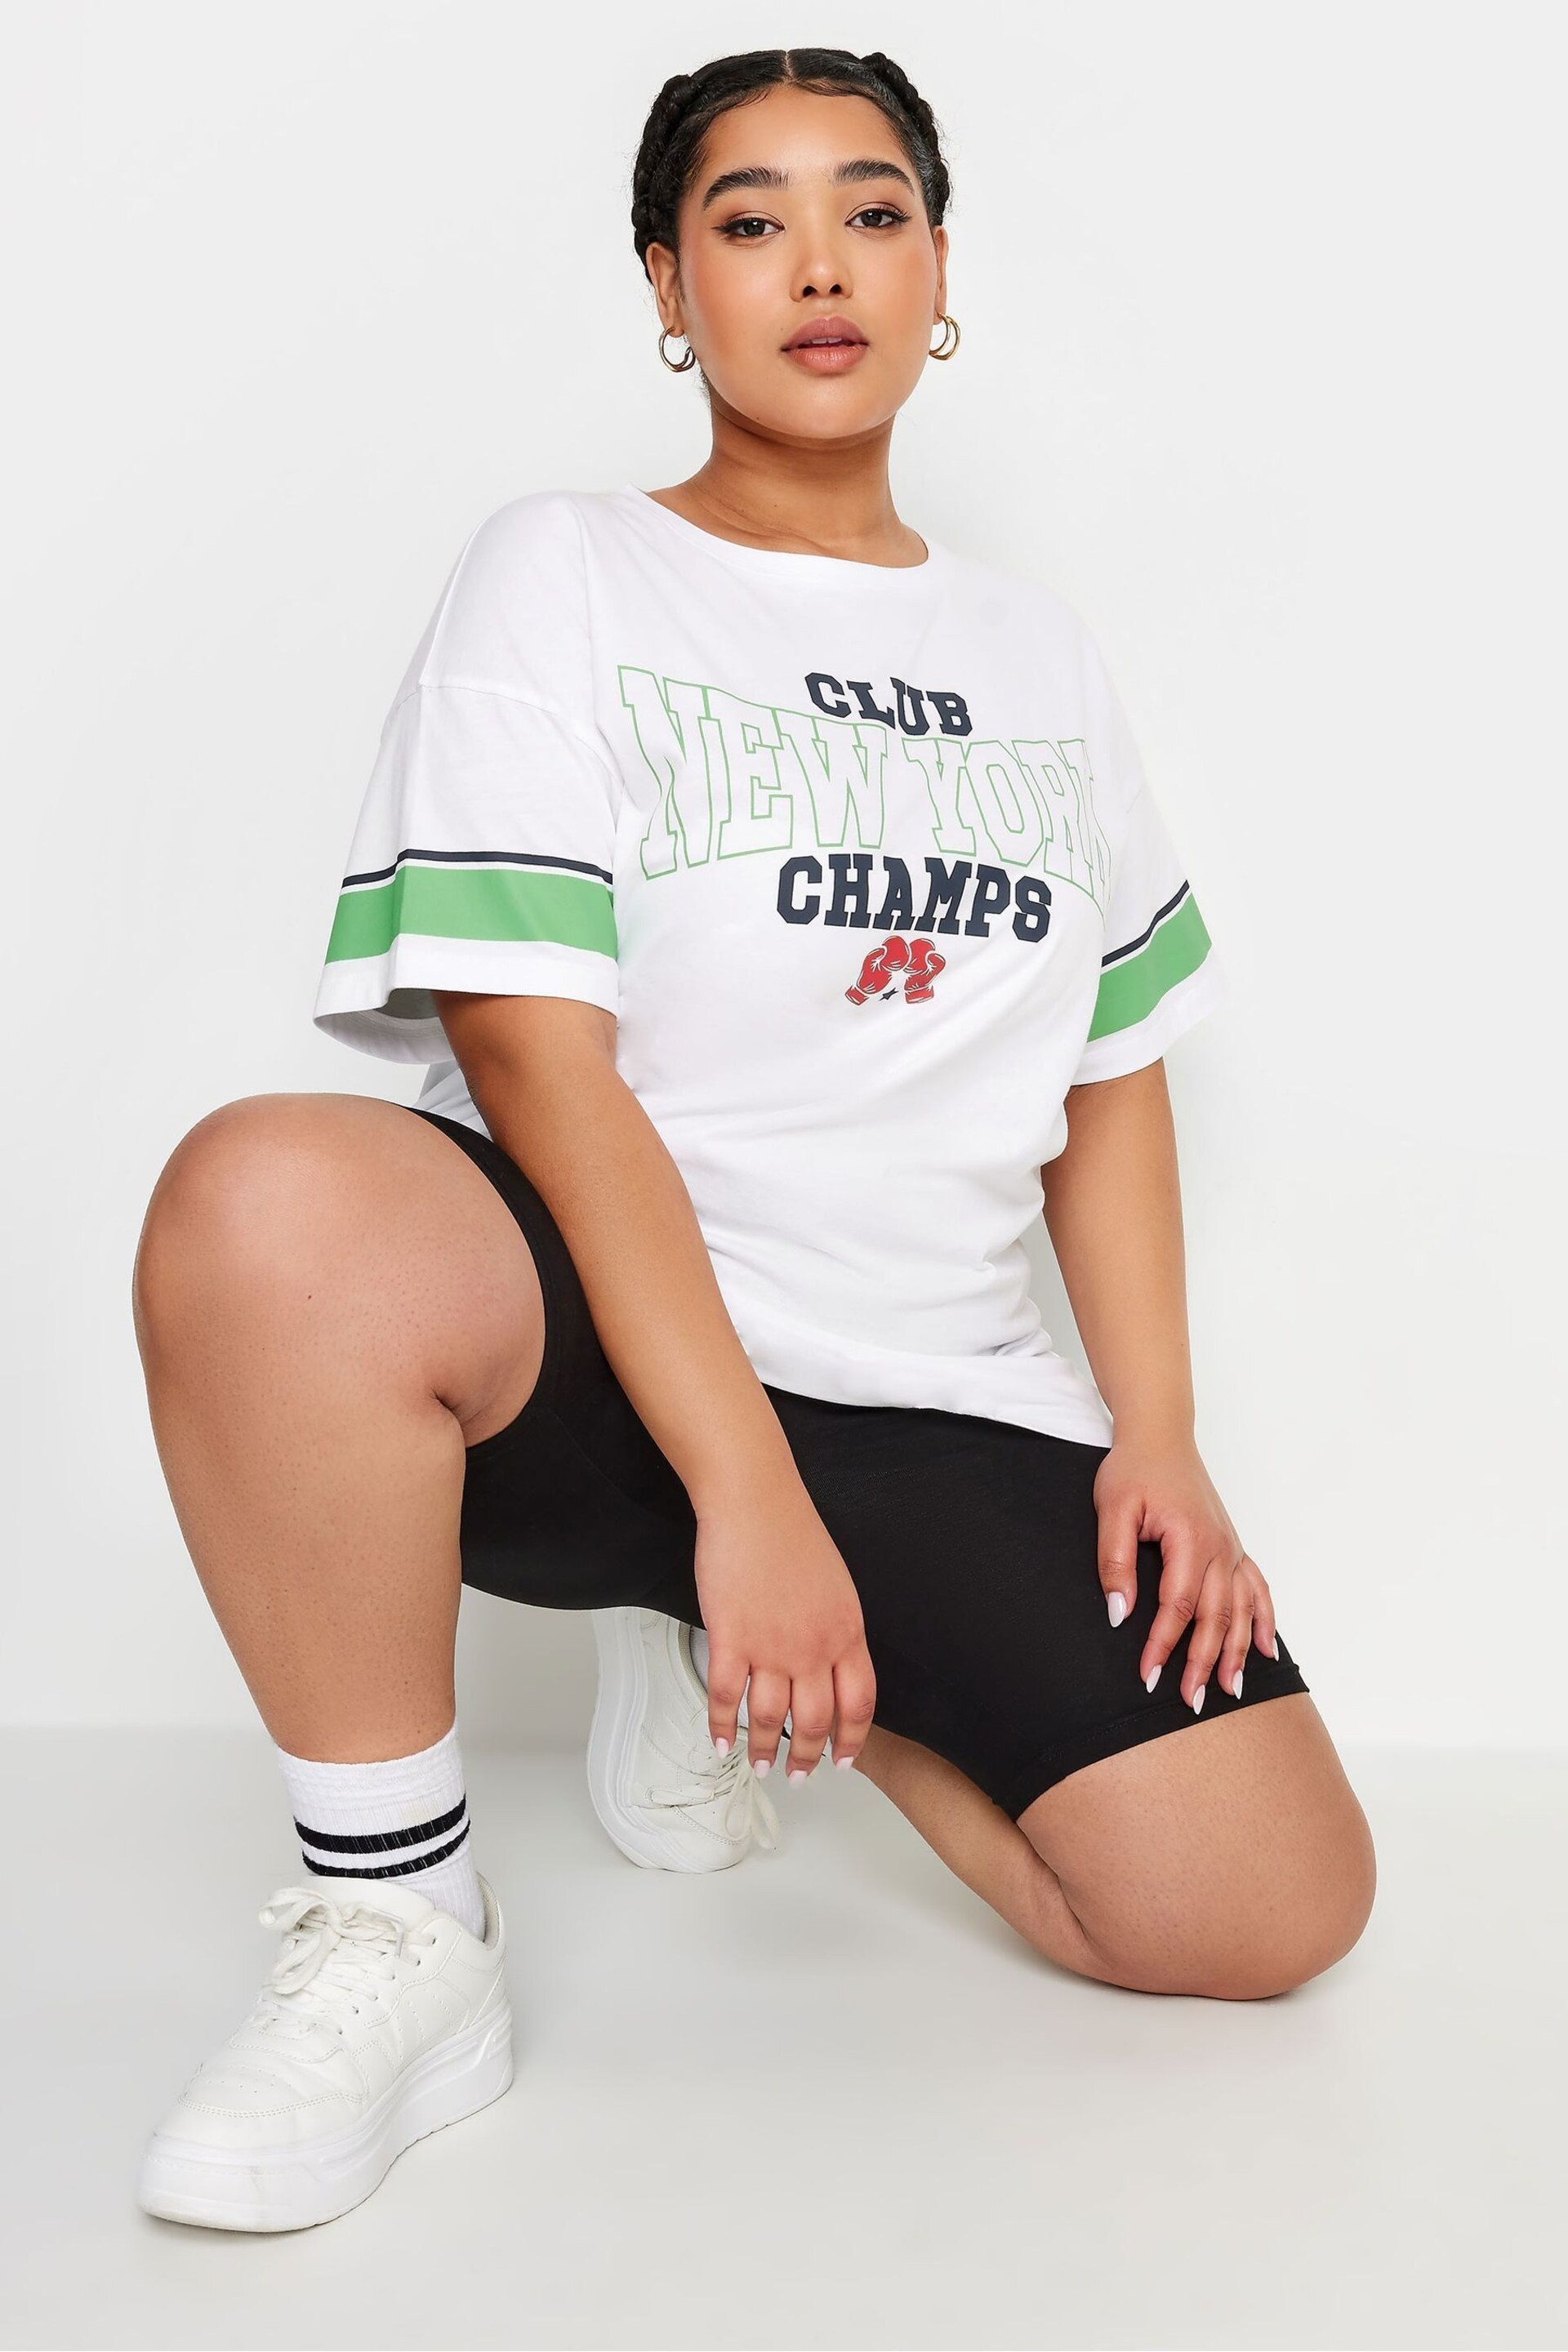 Yours Curve Cream 'New York Champs' Varsity T-Shirt - Image 4 of 4